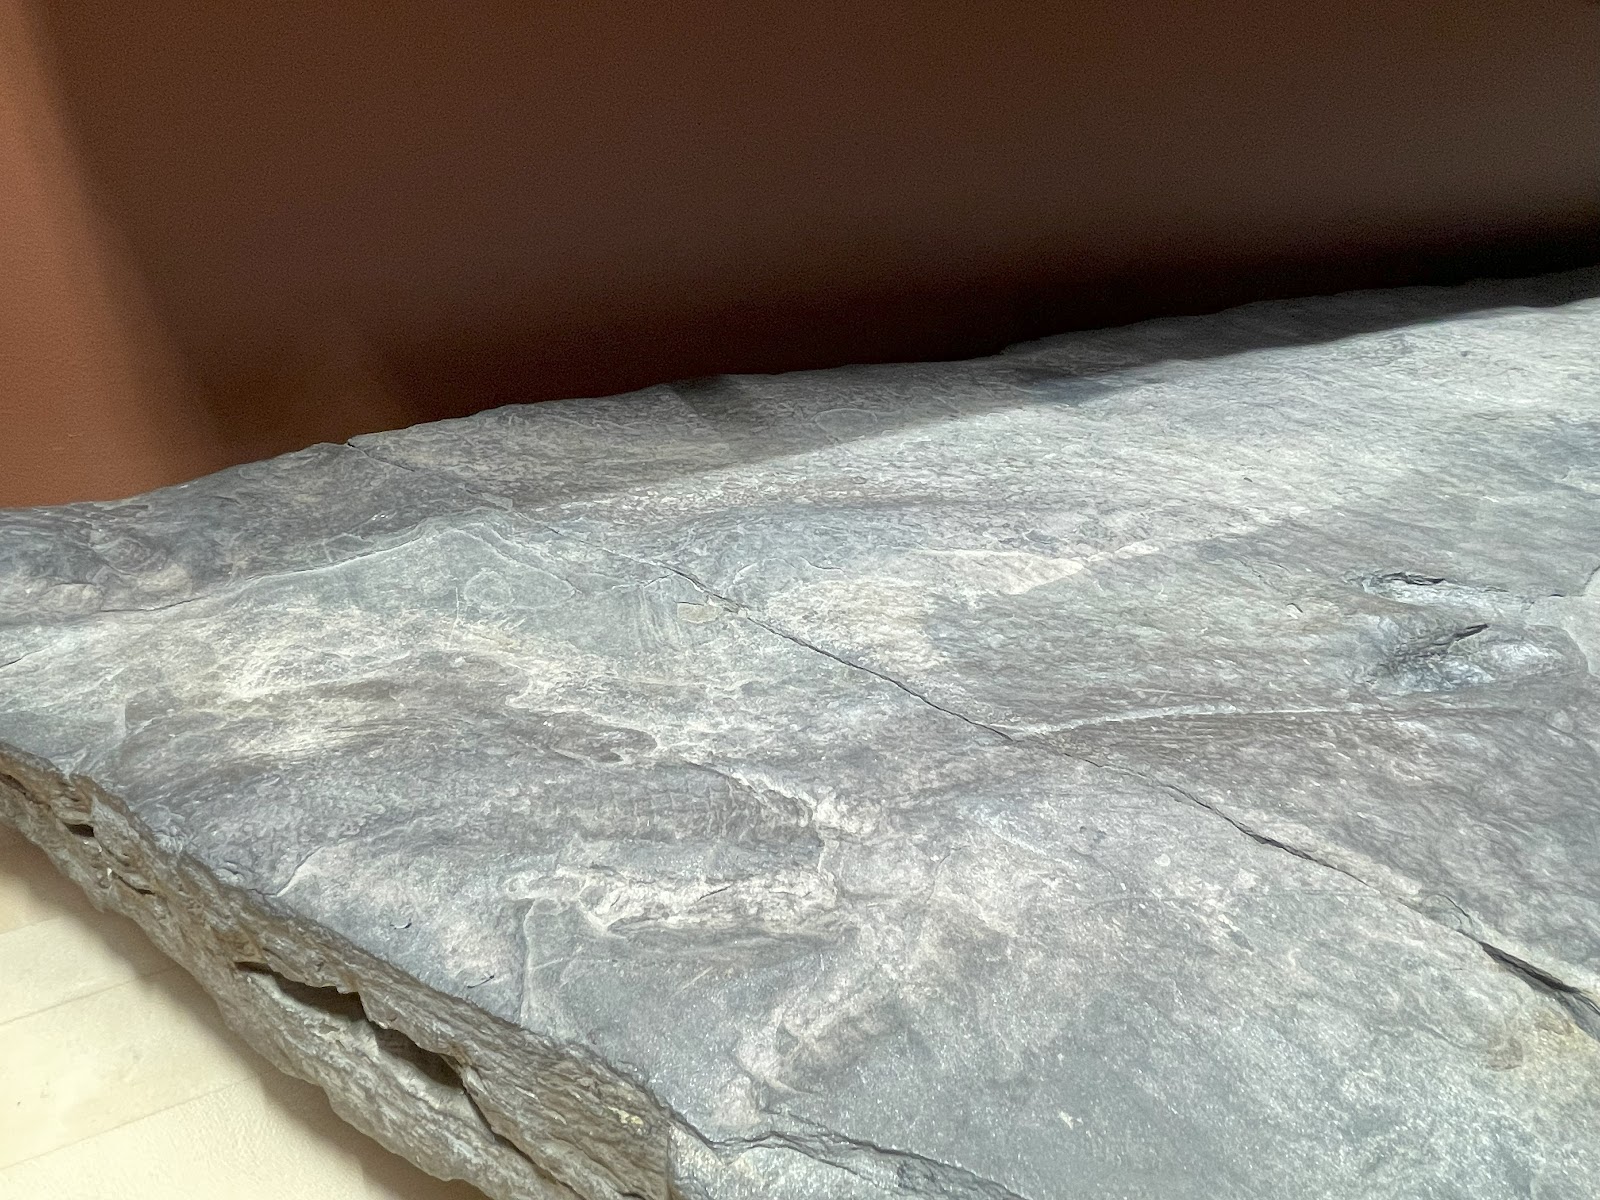 A thick, gray stone lies flat on a tan, wooden counter. There are faint hints of ancient feather markings on the rock.